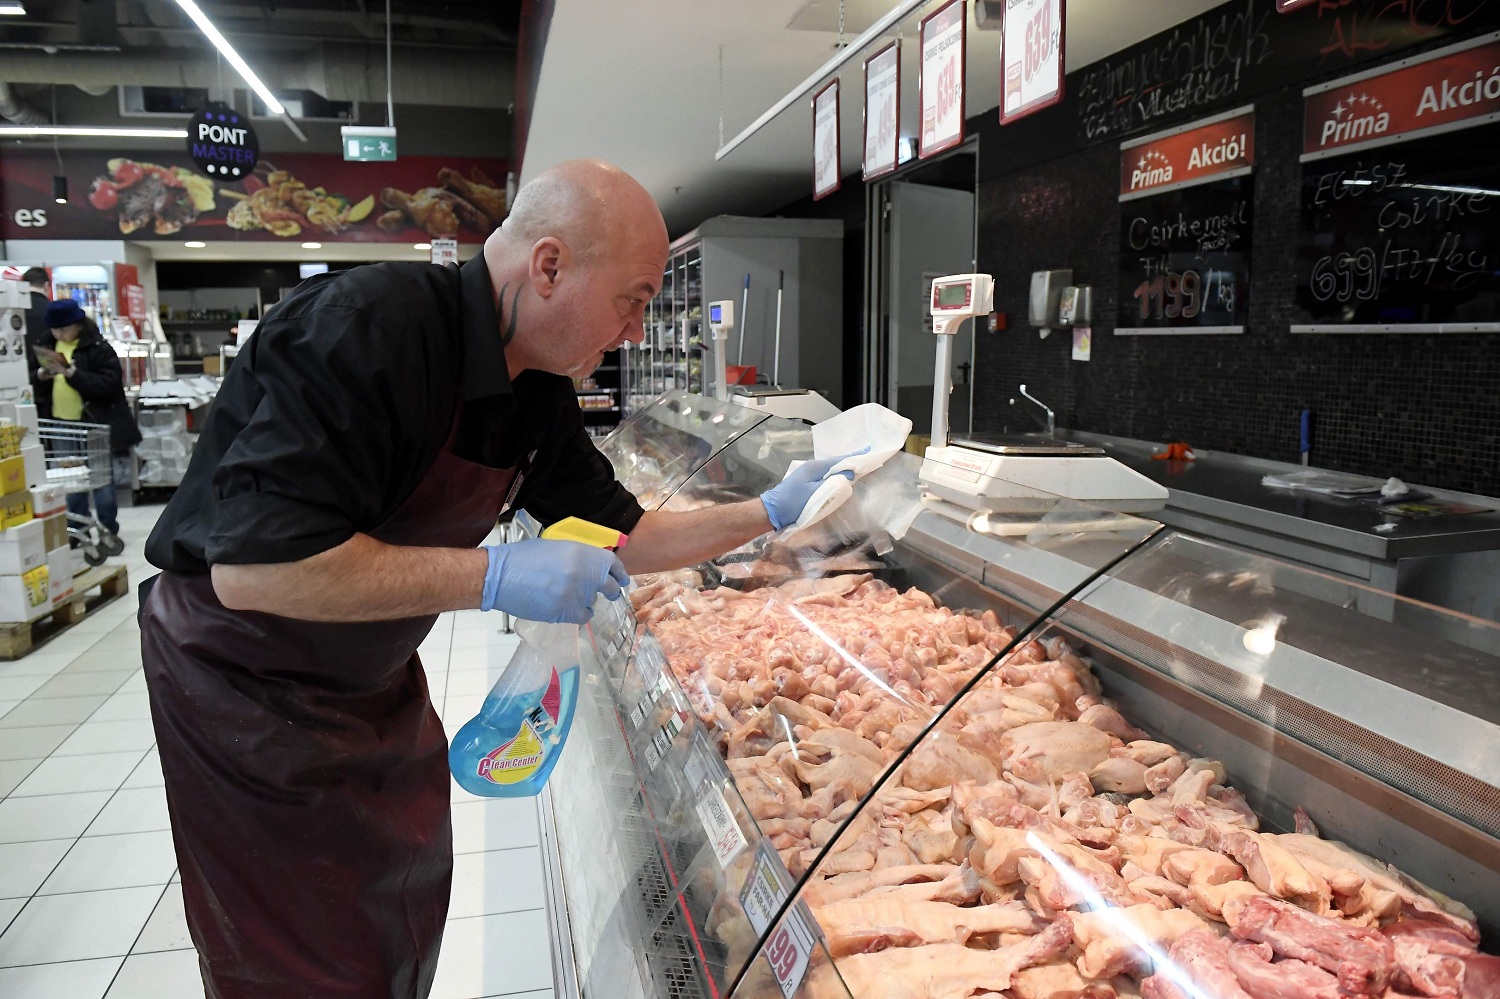 An employee disinfects the glass over of a butcher counter to prevent the spread of the novel coronavirus in a food store in Budapest Hungary